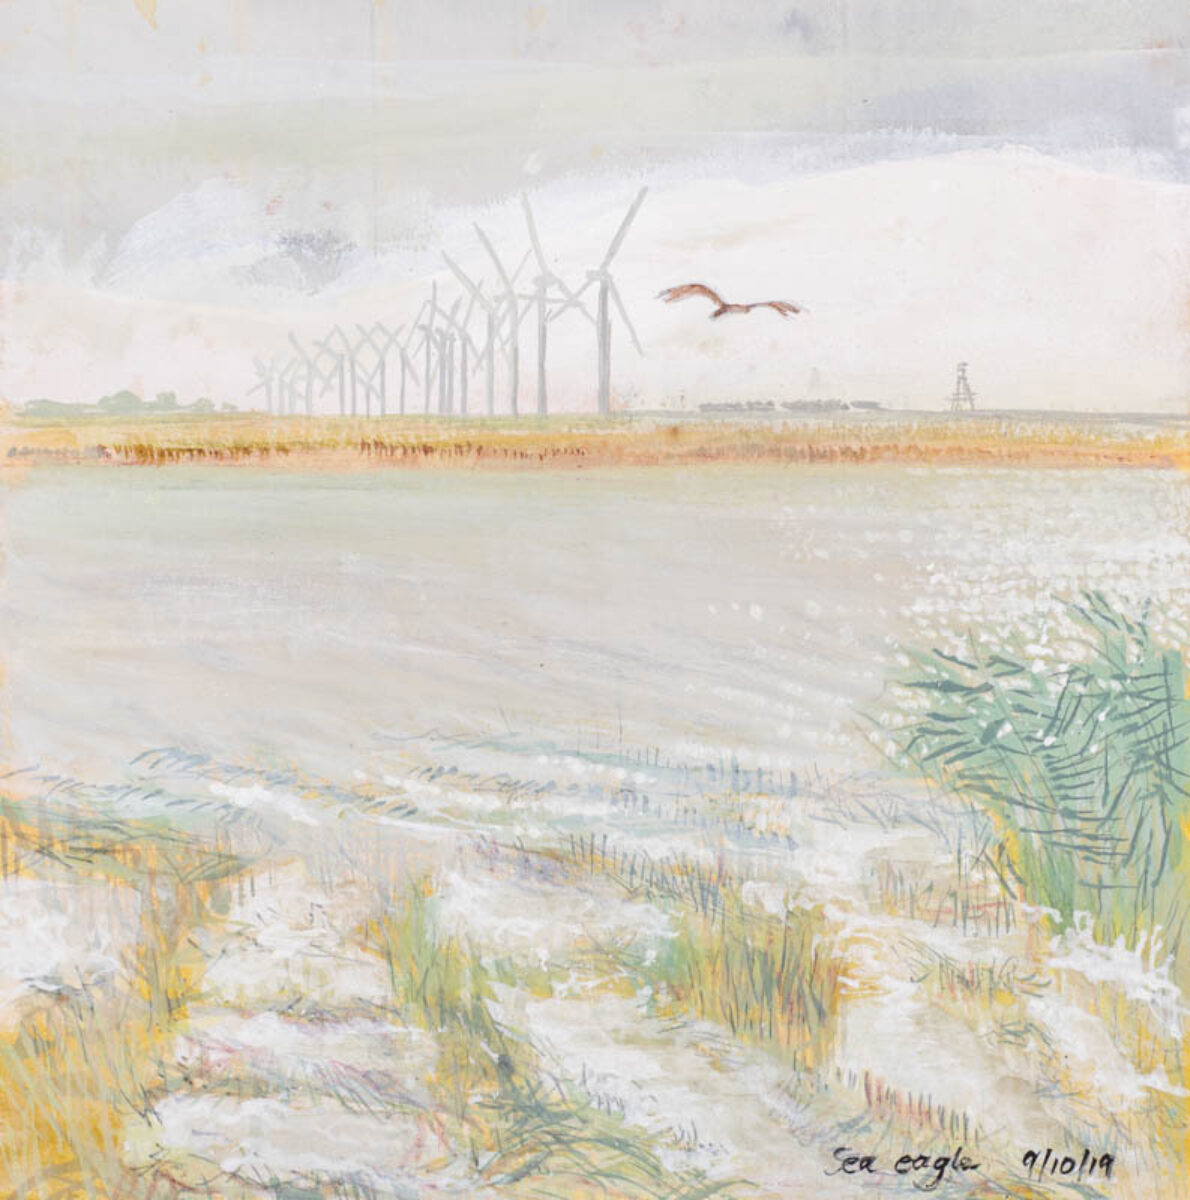 Artwork image titled: Marshland looking into Germany from Danish Wadden Sea